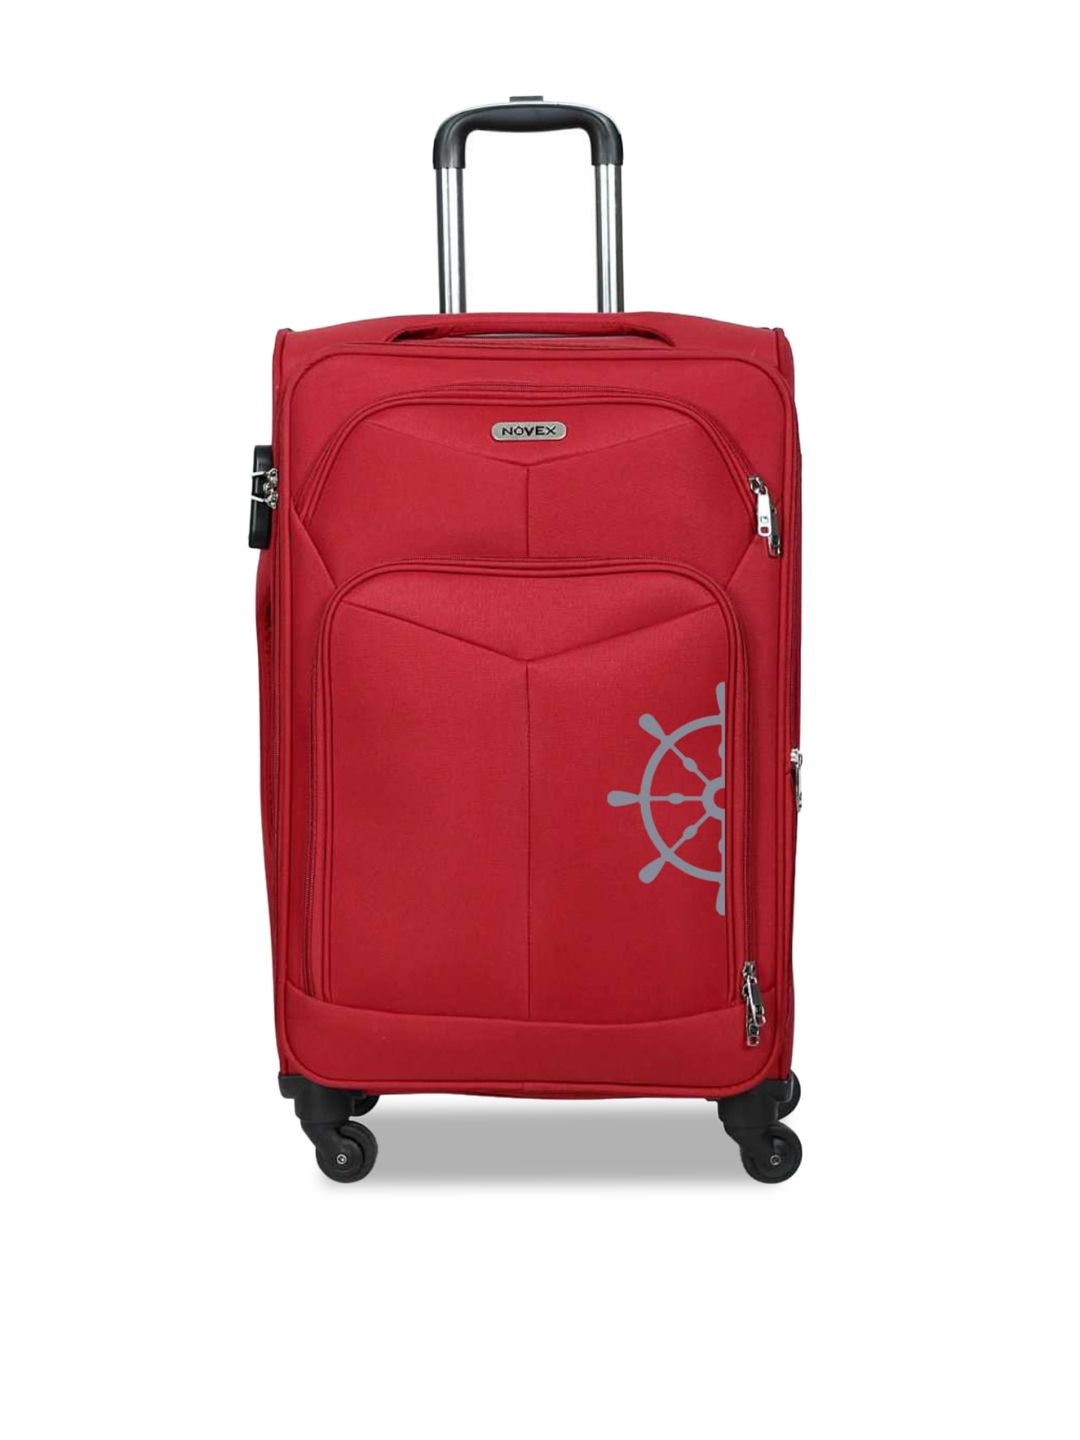 NOVEX Red Solid Soft Sided Trolley Suitcase Price in India